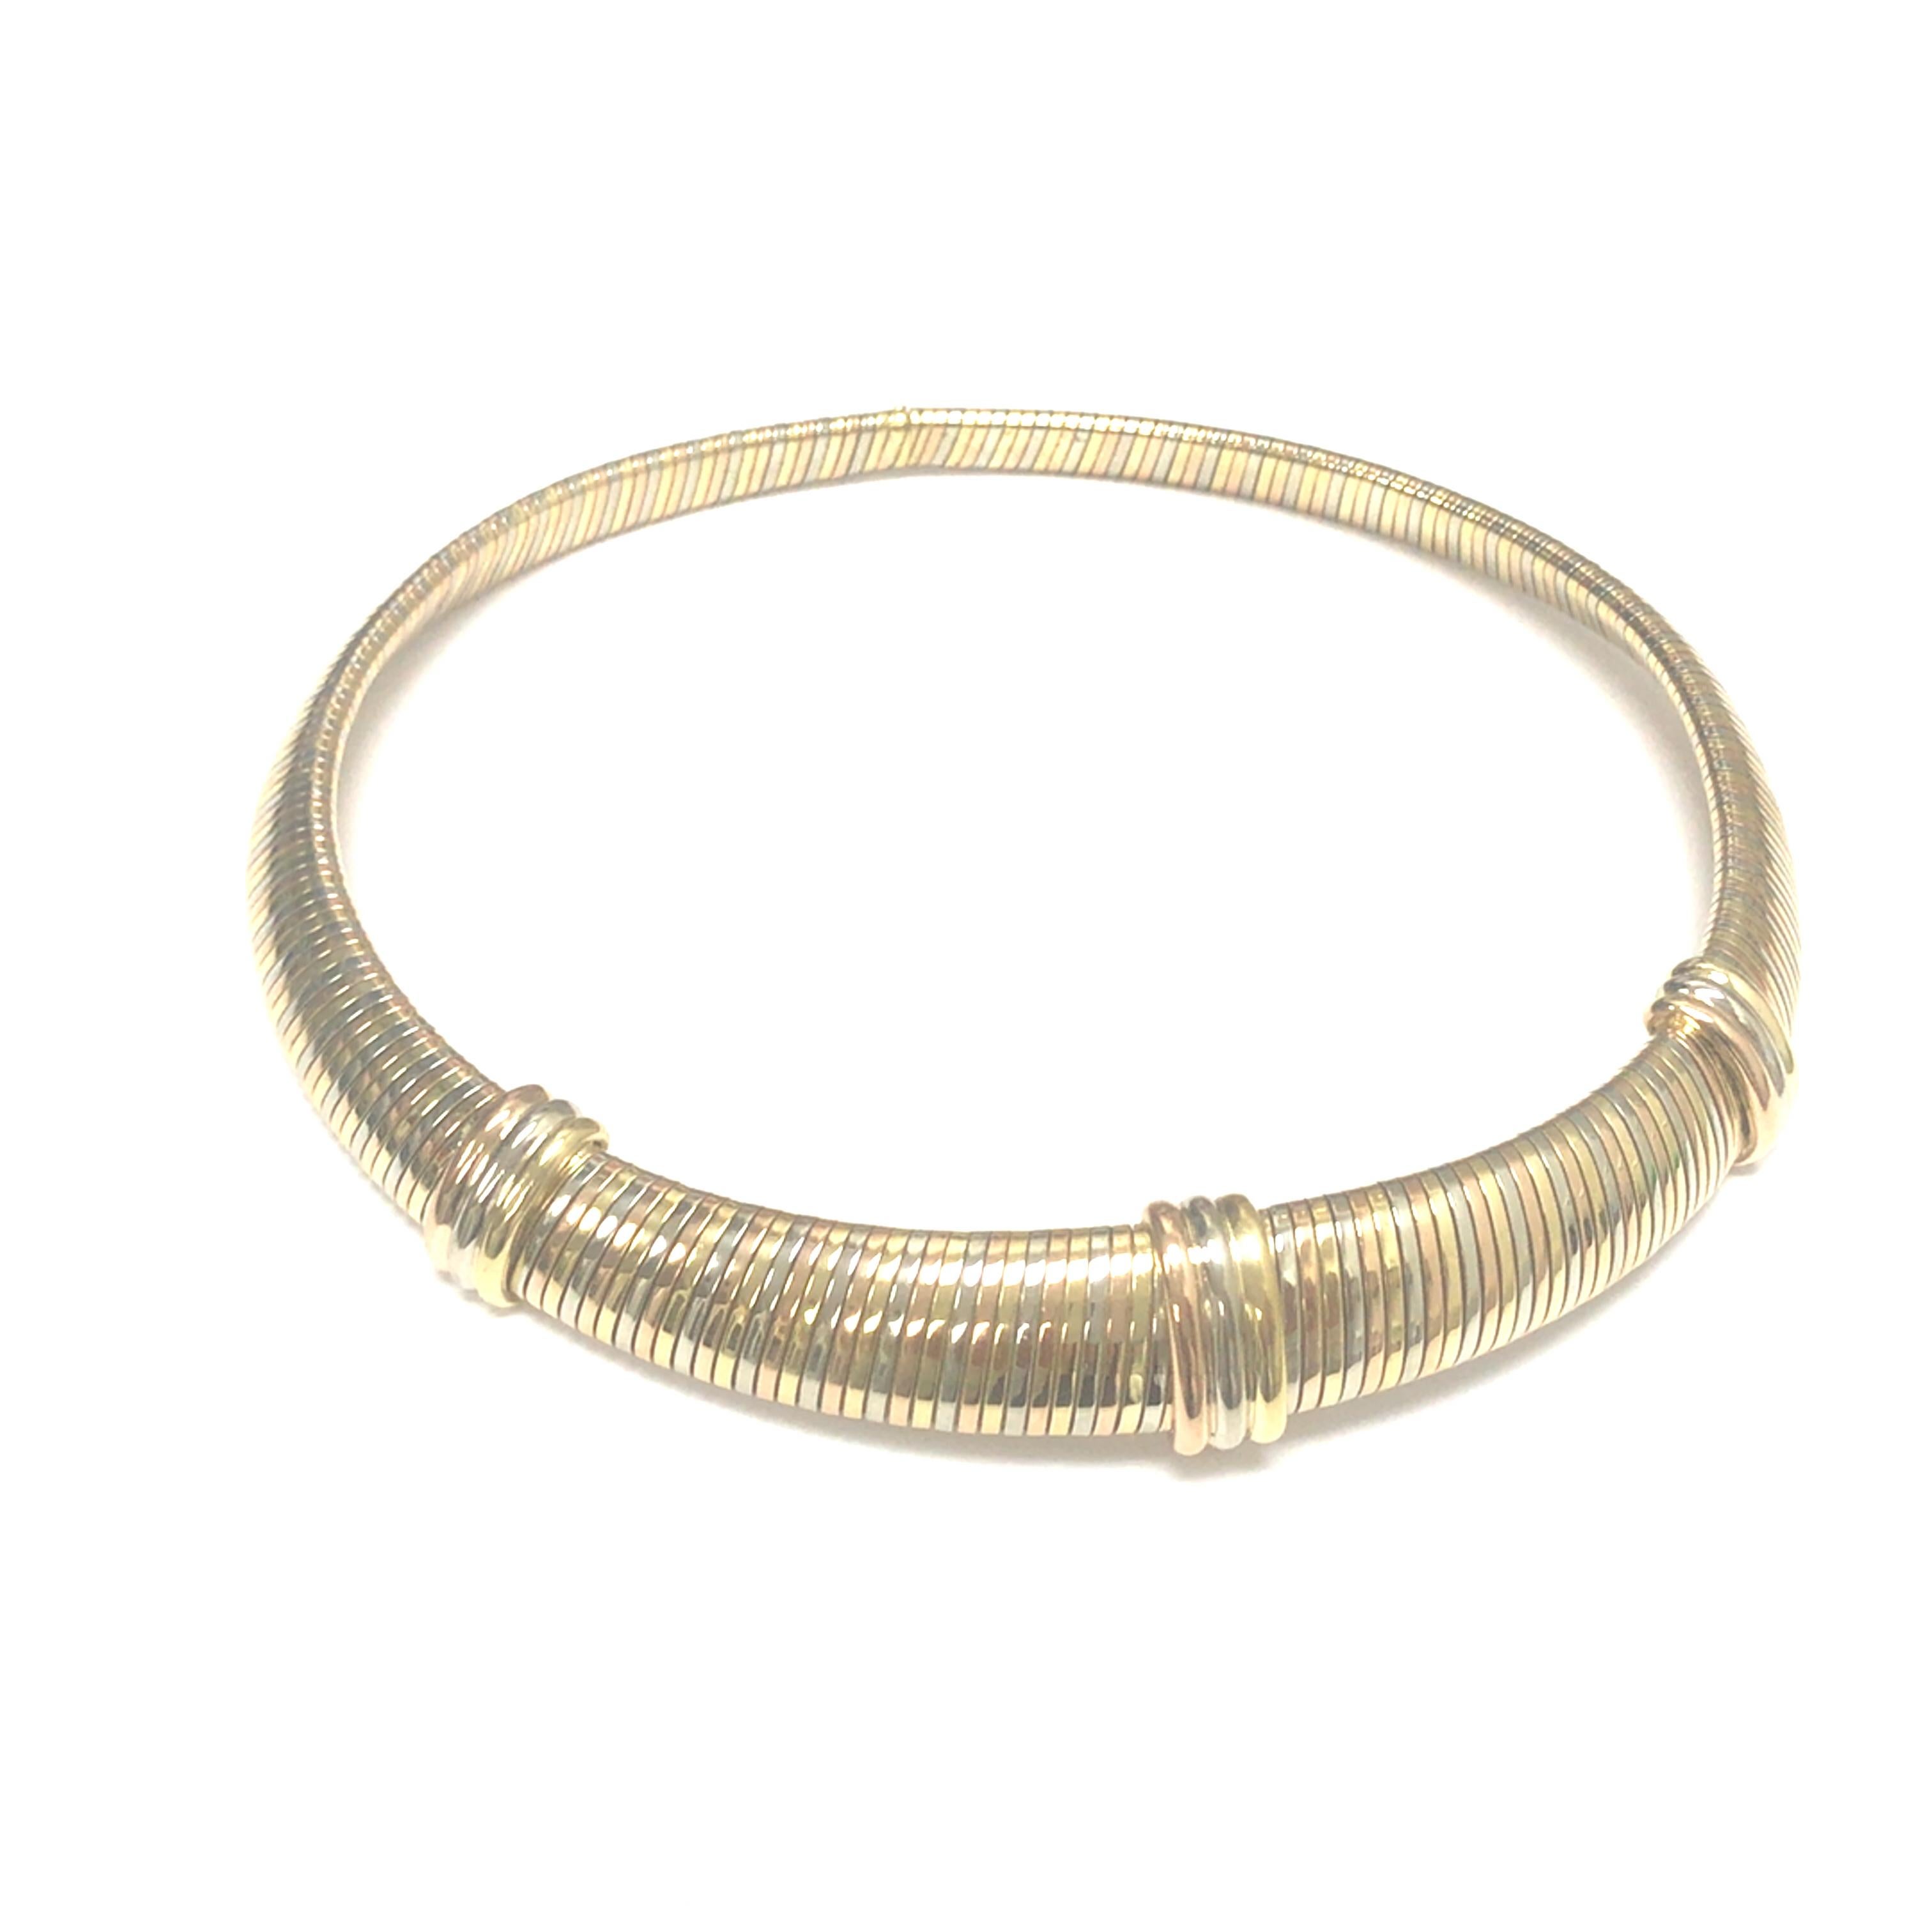 Cartier 18K Tri-Color Snake Choker Necklace.  The Necklace measures 16 inch in length and 5/8 inch in width.  98.59 grams.  Stamped Cartier 750 K18 1501. 98.59 Grams.